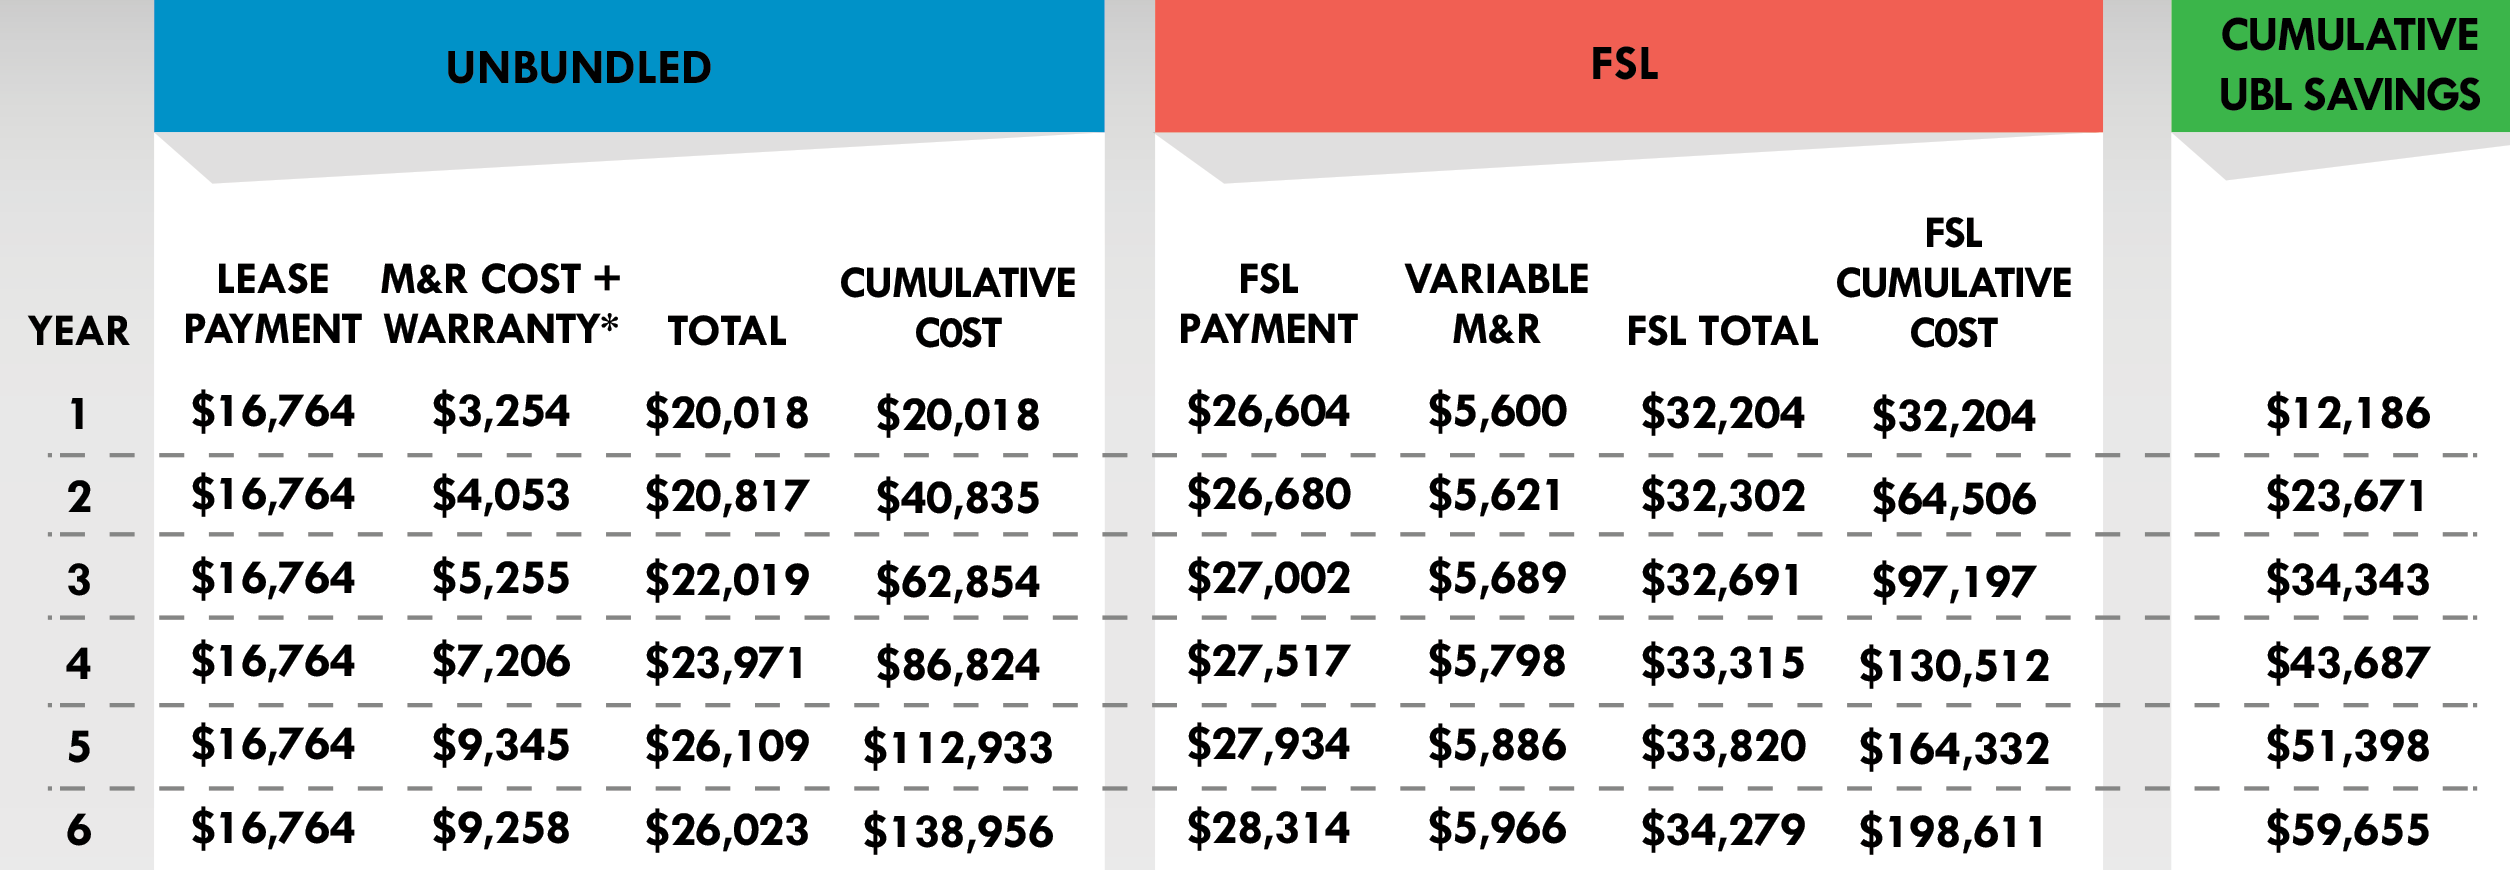 UBL-FSL graphic 2.png